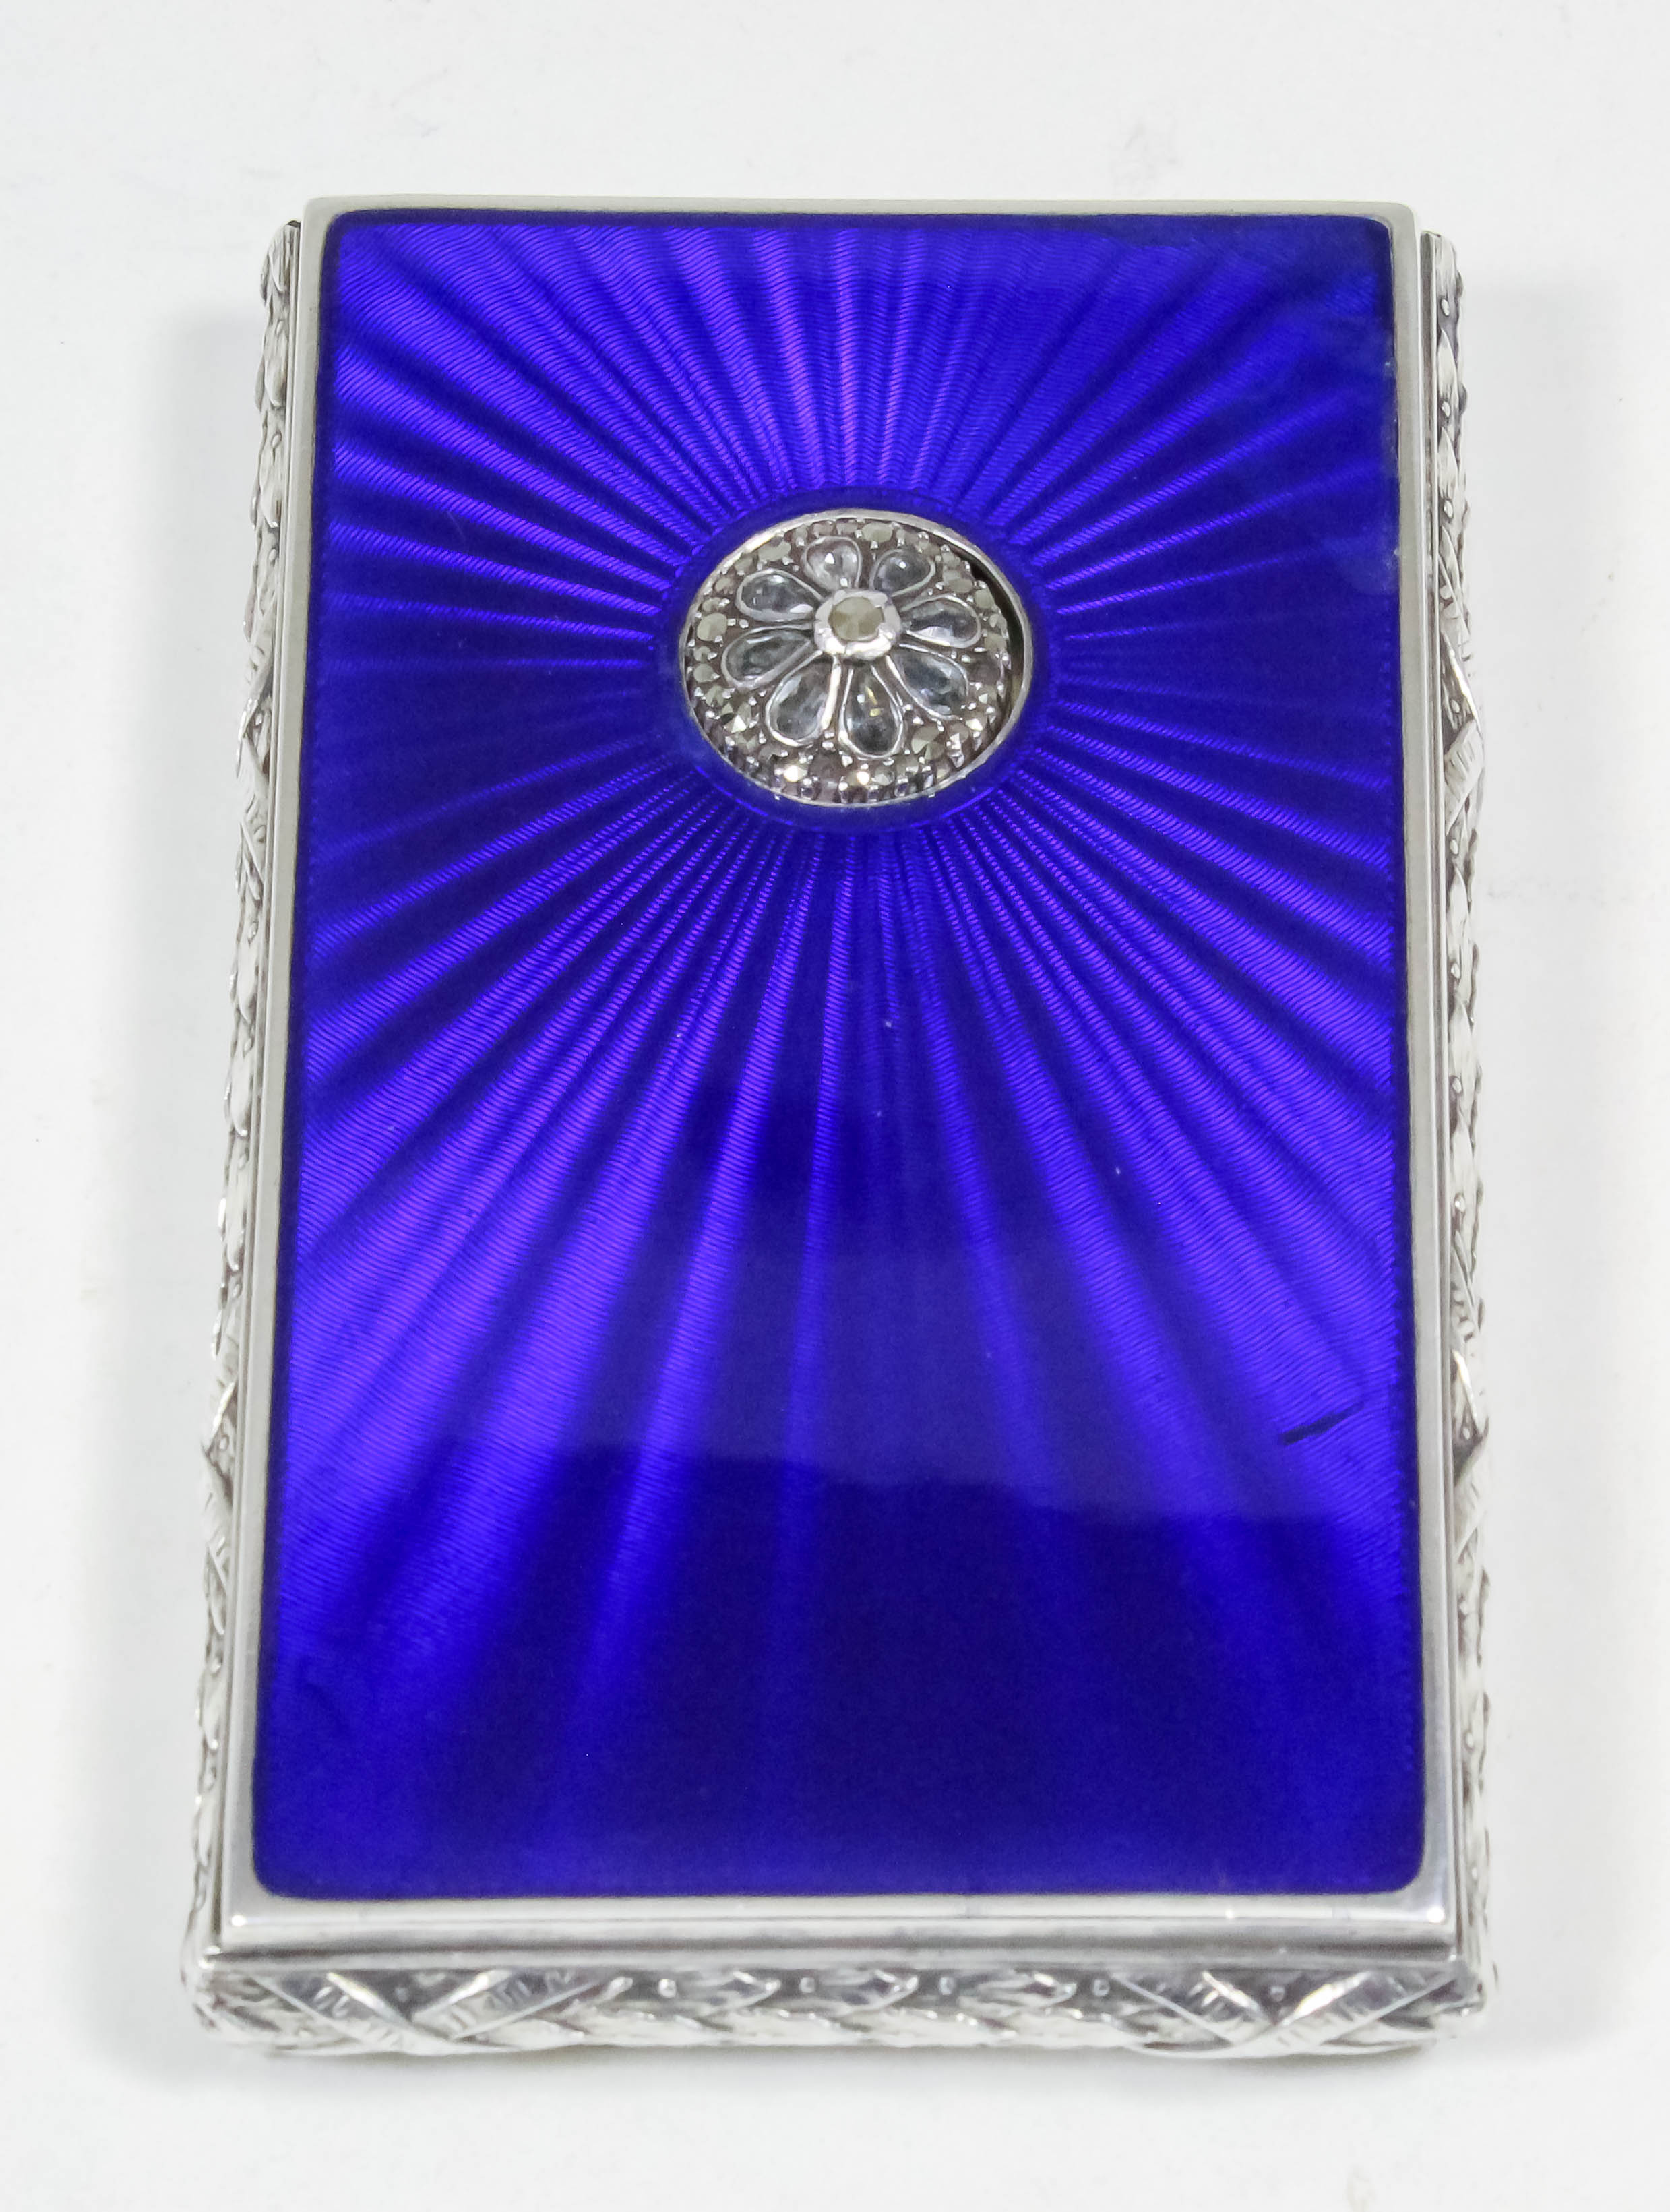 A Continental silvery metal and royal blue guilloche enamel rectangular card/cigarette case with